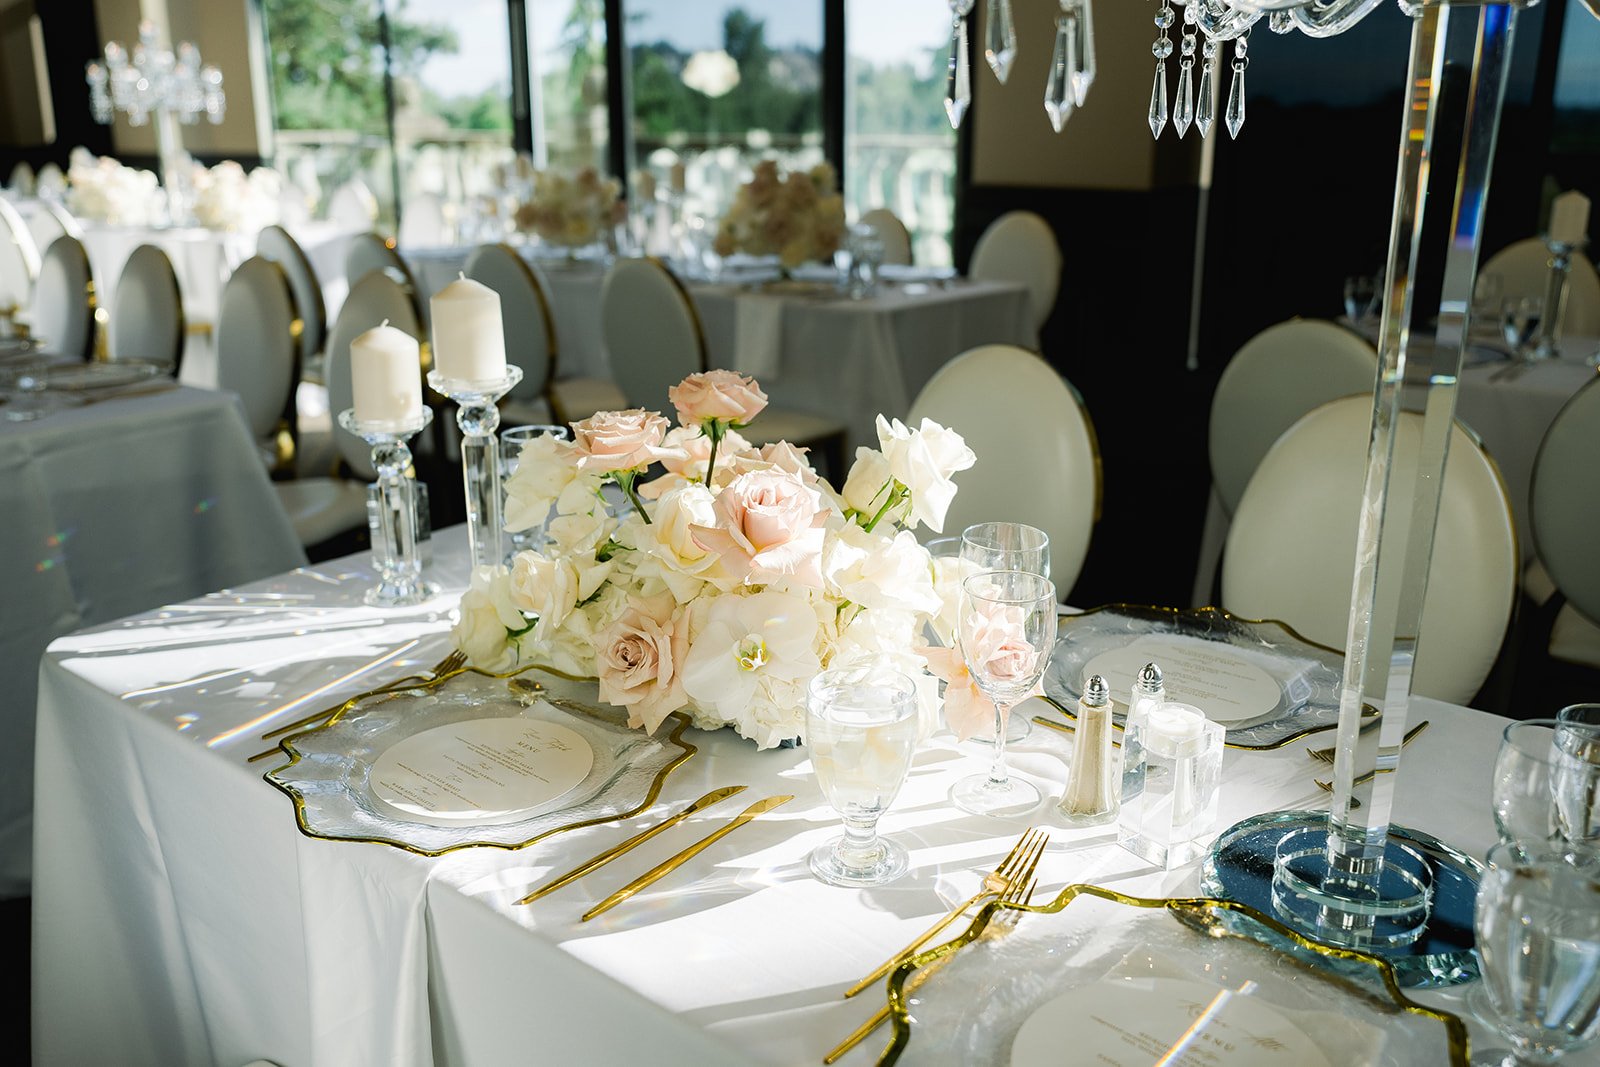 Luxe head table is adorned by by pink and white floral arrangement